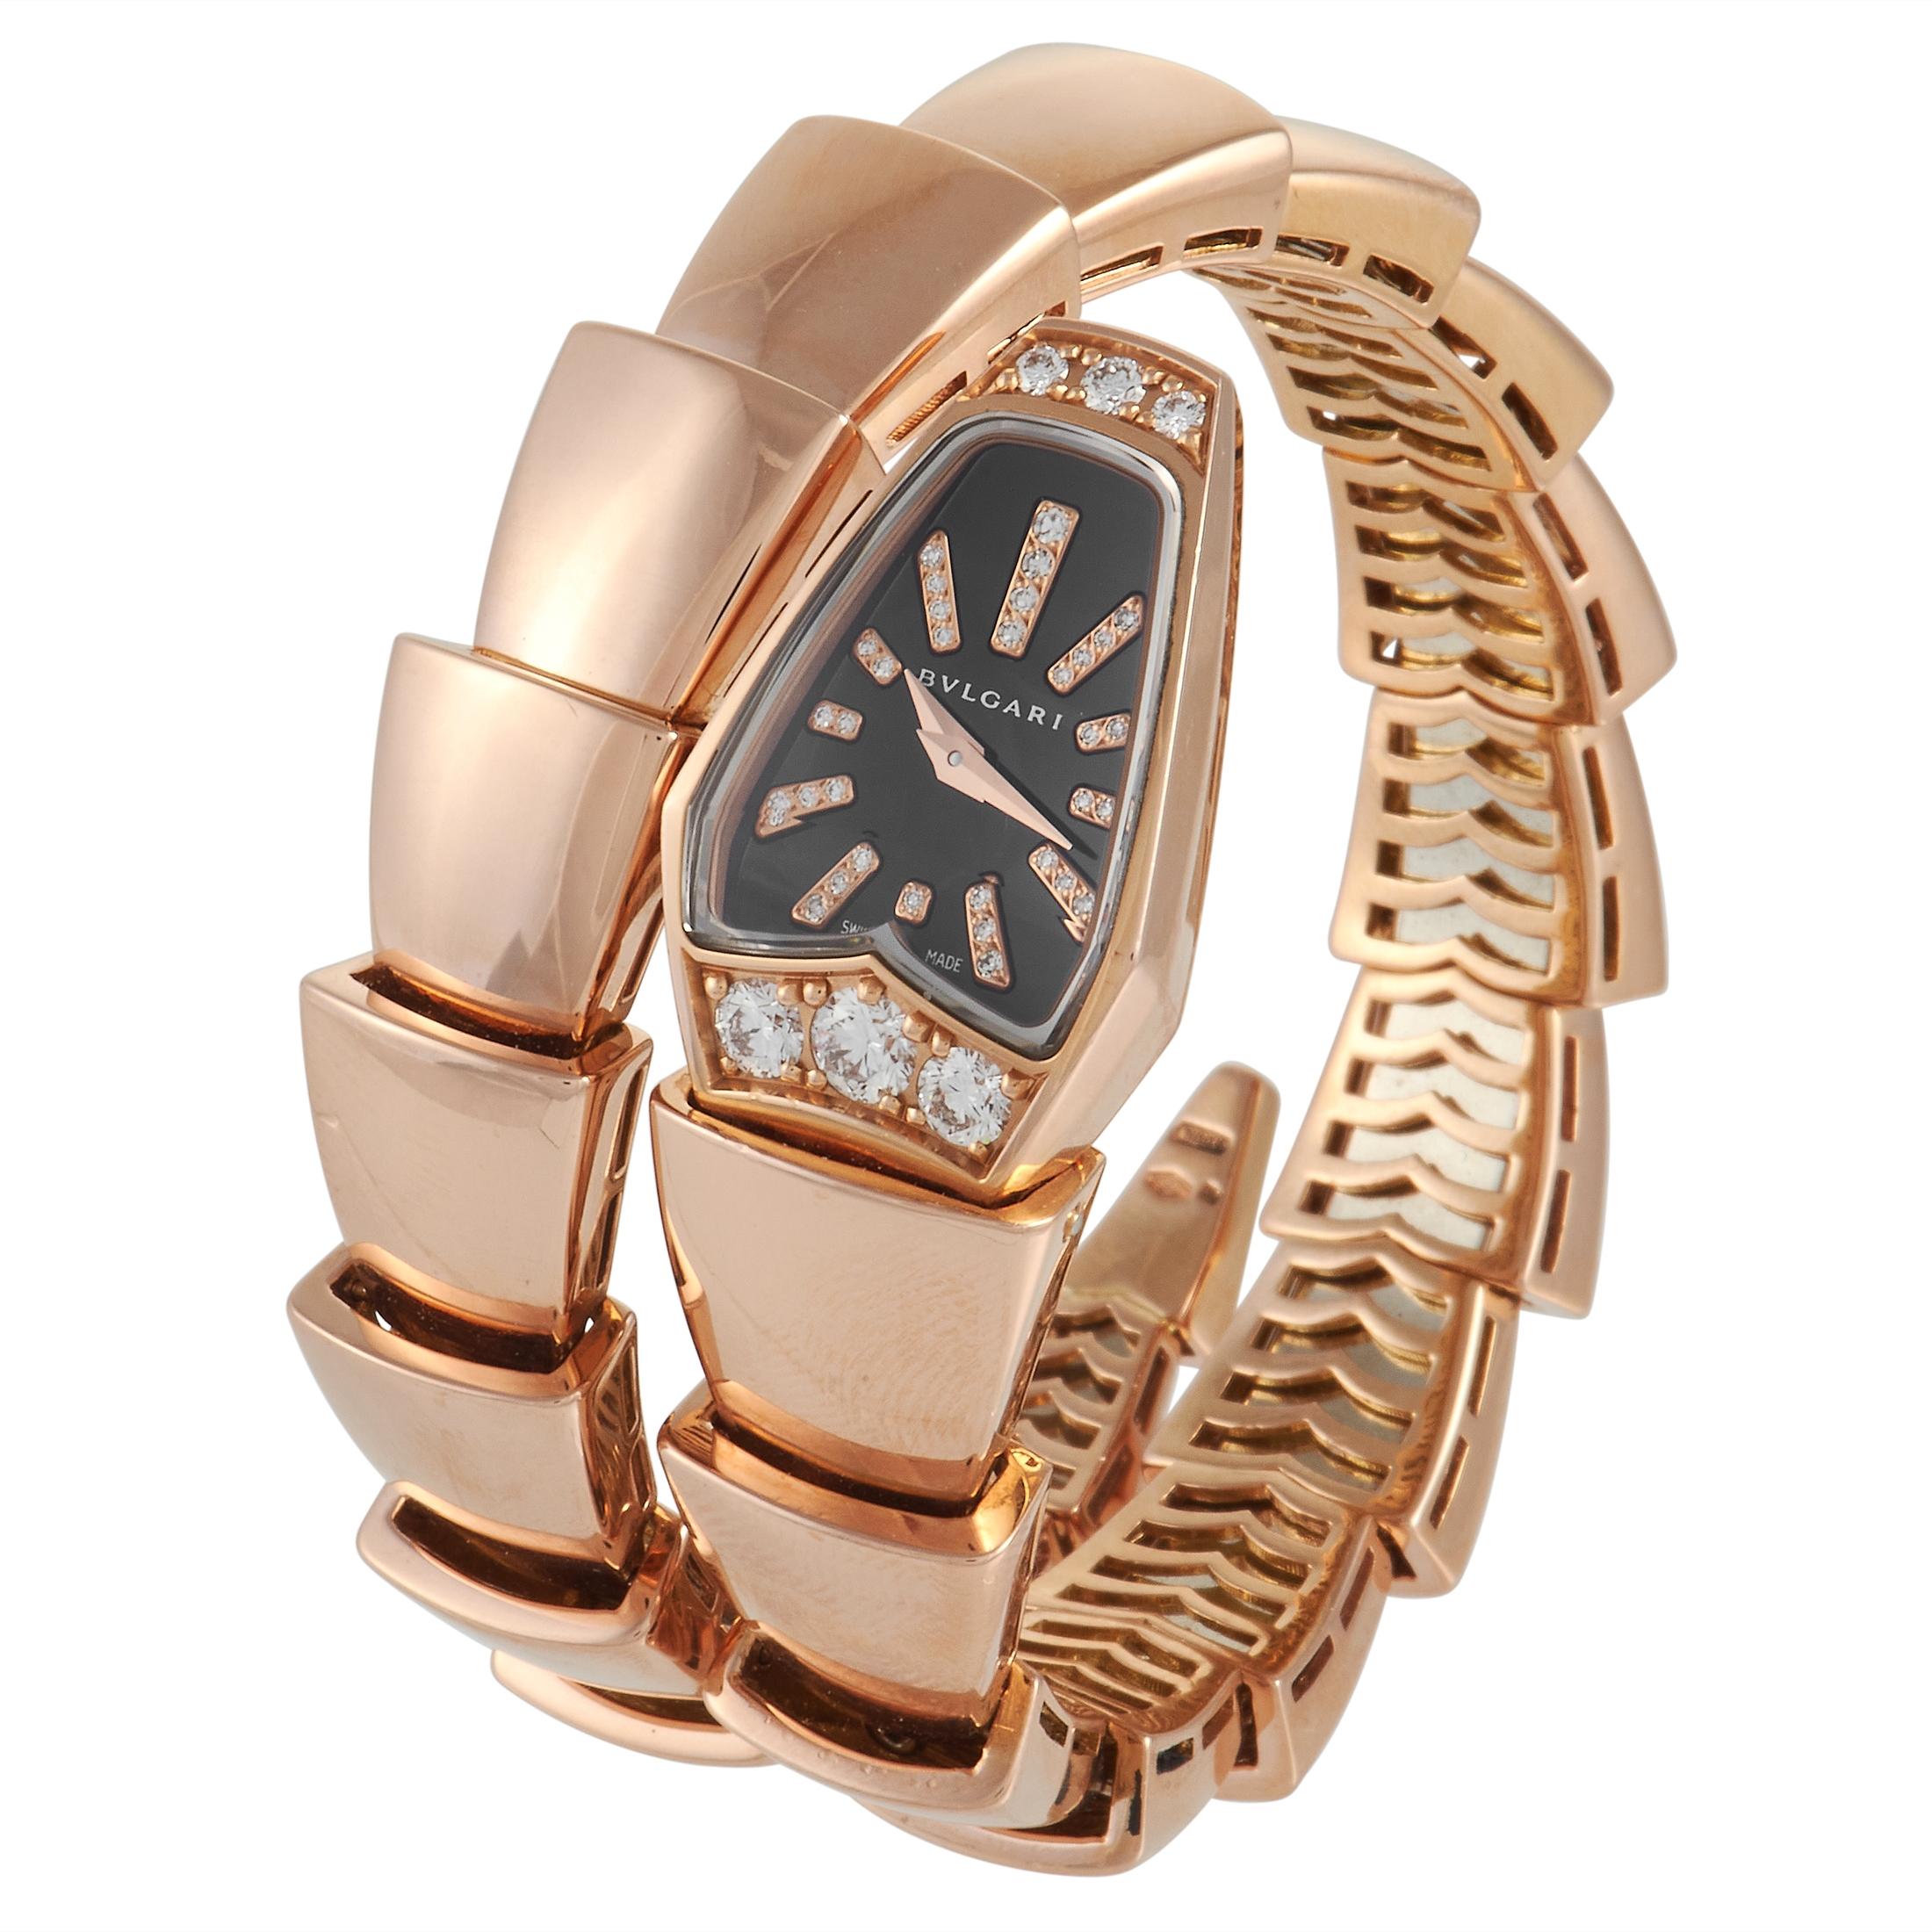 With a hypnotic design, this ladies' timepiece works double duty as a timekeeper and a sensual piece of jewelry. It features a 26mm case in 18K rose gold in the shape of a serpent's head. The dial is in black with diamond-lined indexes. Protecting